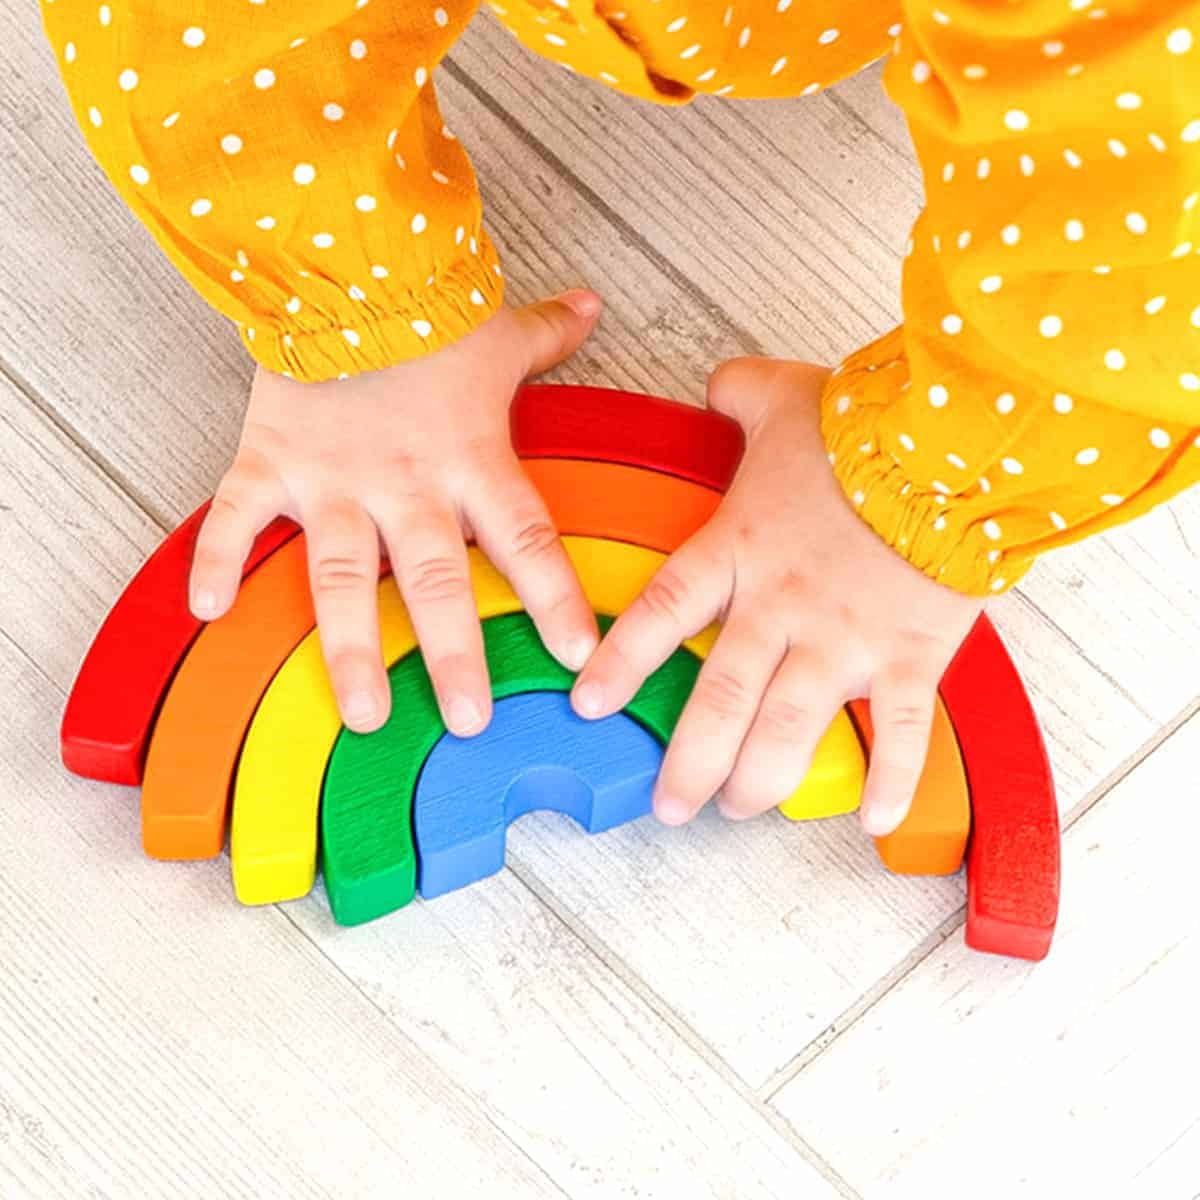 Learn 10 easy spatial awareness activities that improve this important skill that can affect handwriting, hand eye coordination, clumsiness, and more...  